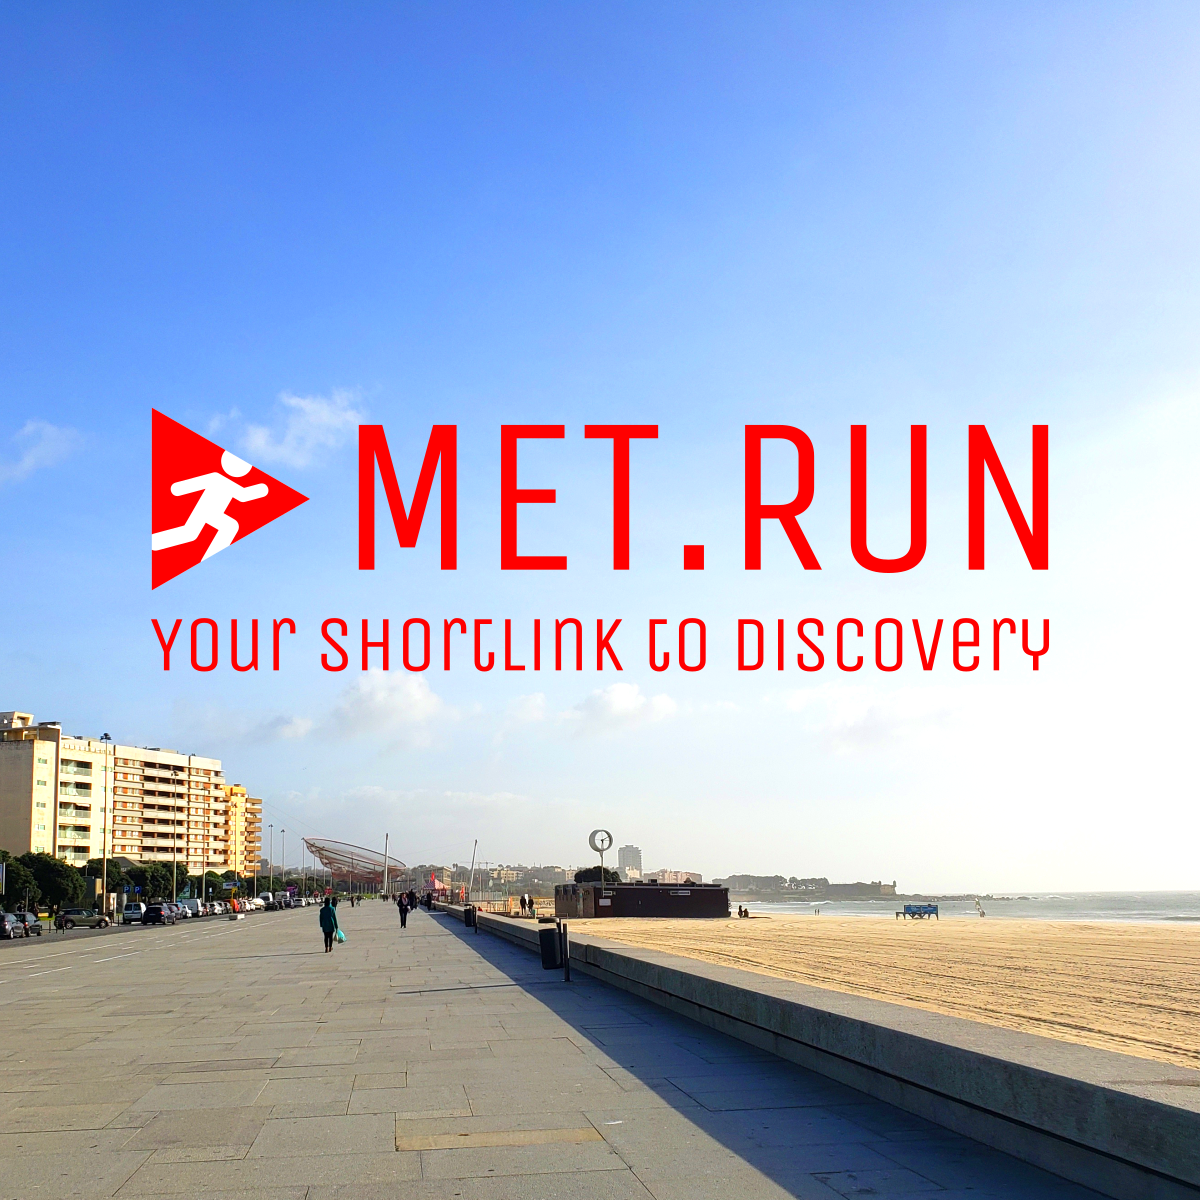 MET.RUN is the new shortlink URL for sports, mobile & remote tourism.